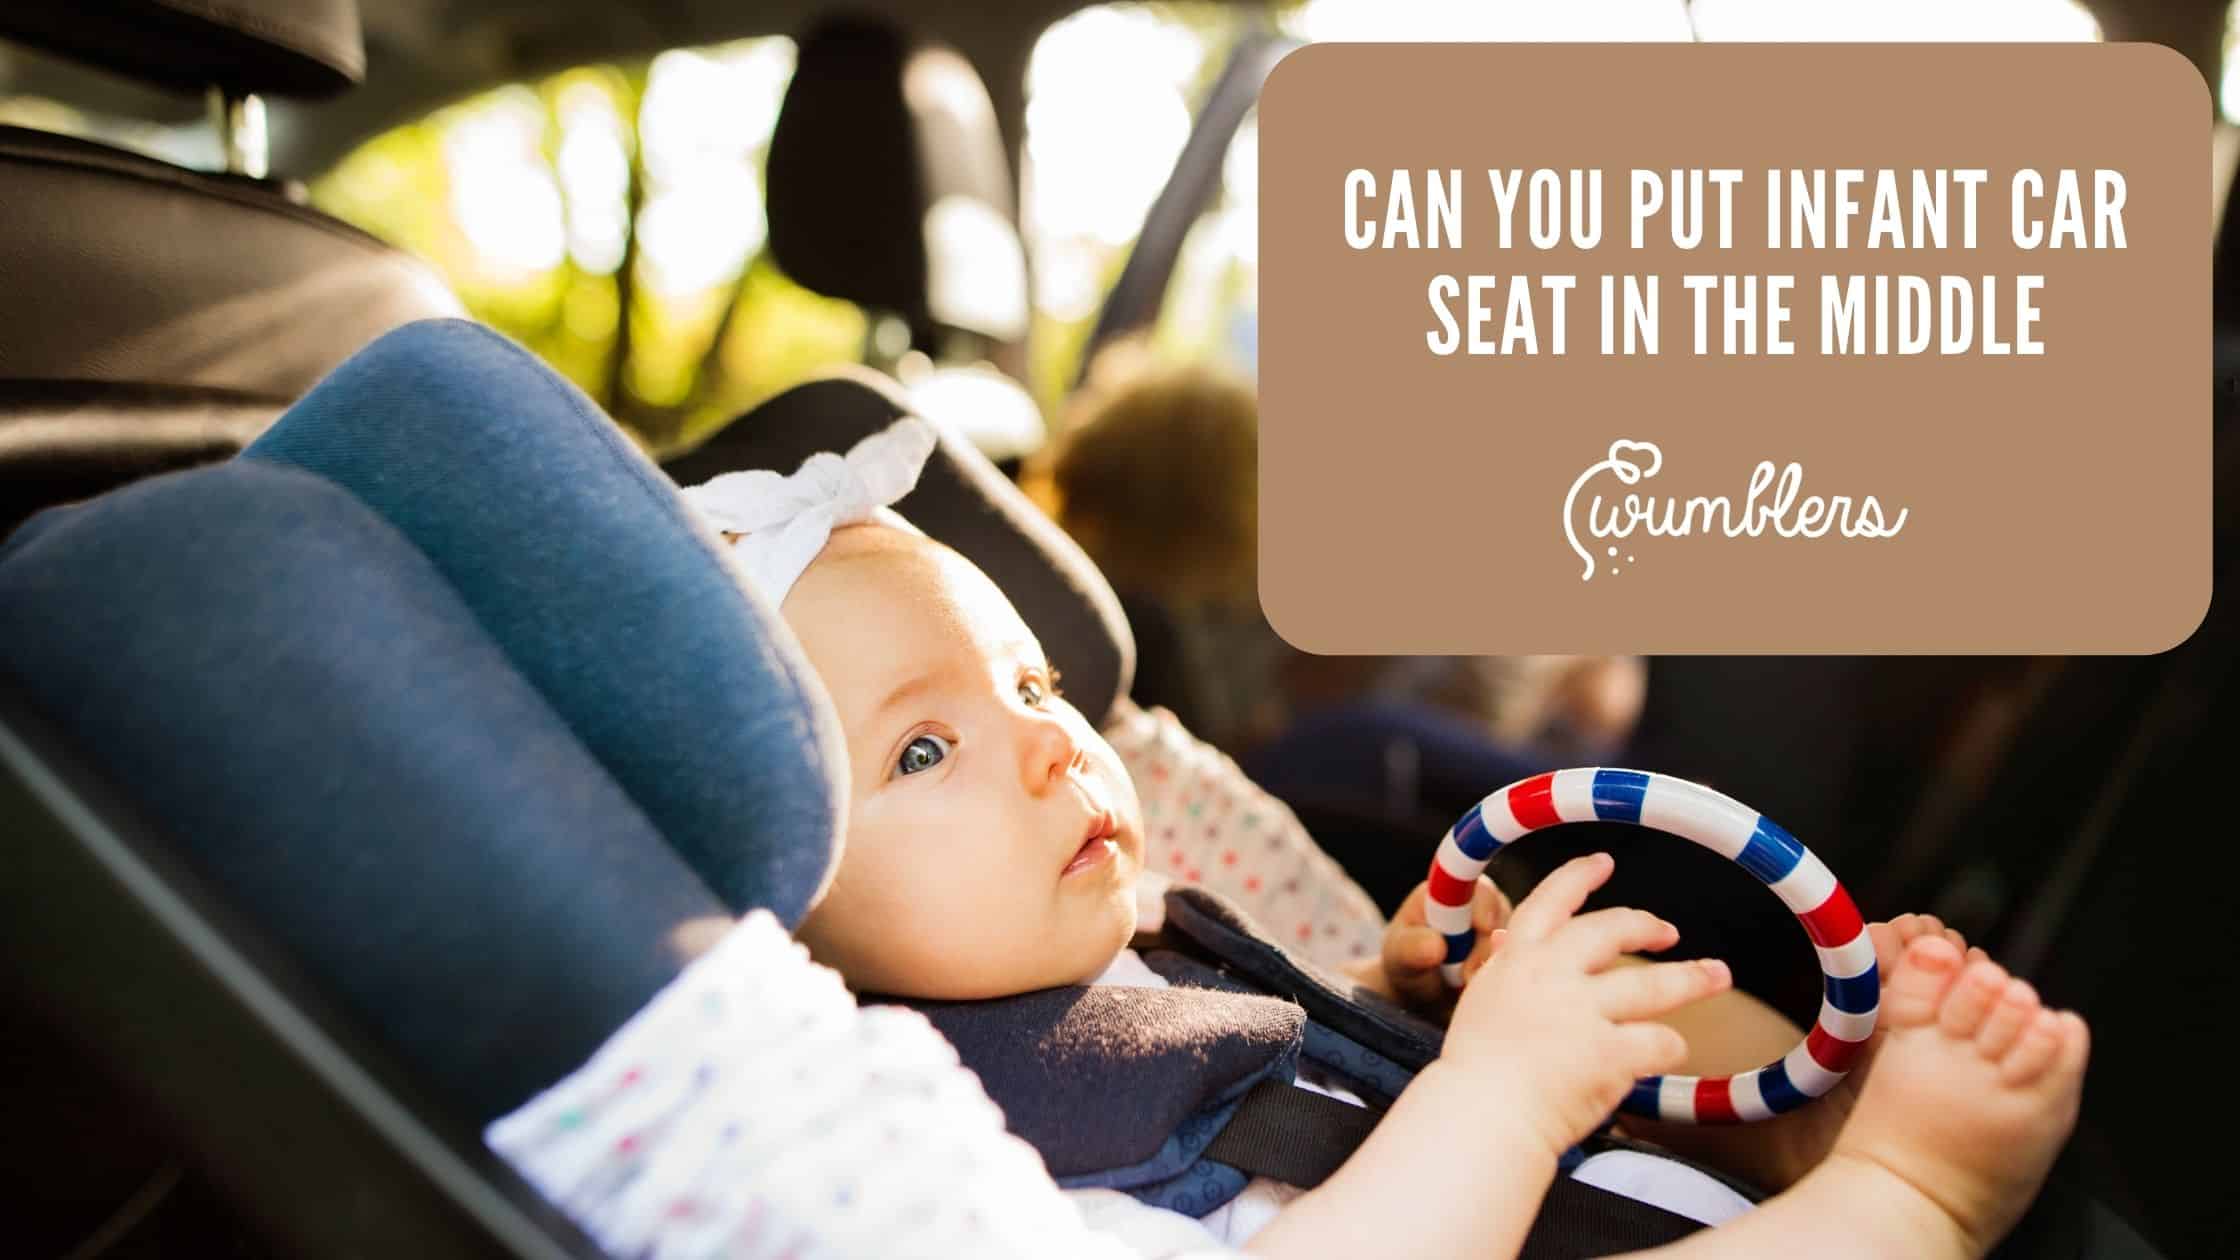 Can You Put Infant Car Seat in the Middle